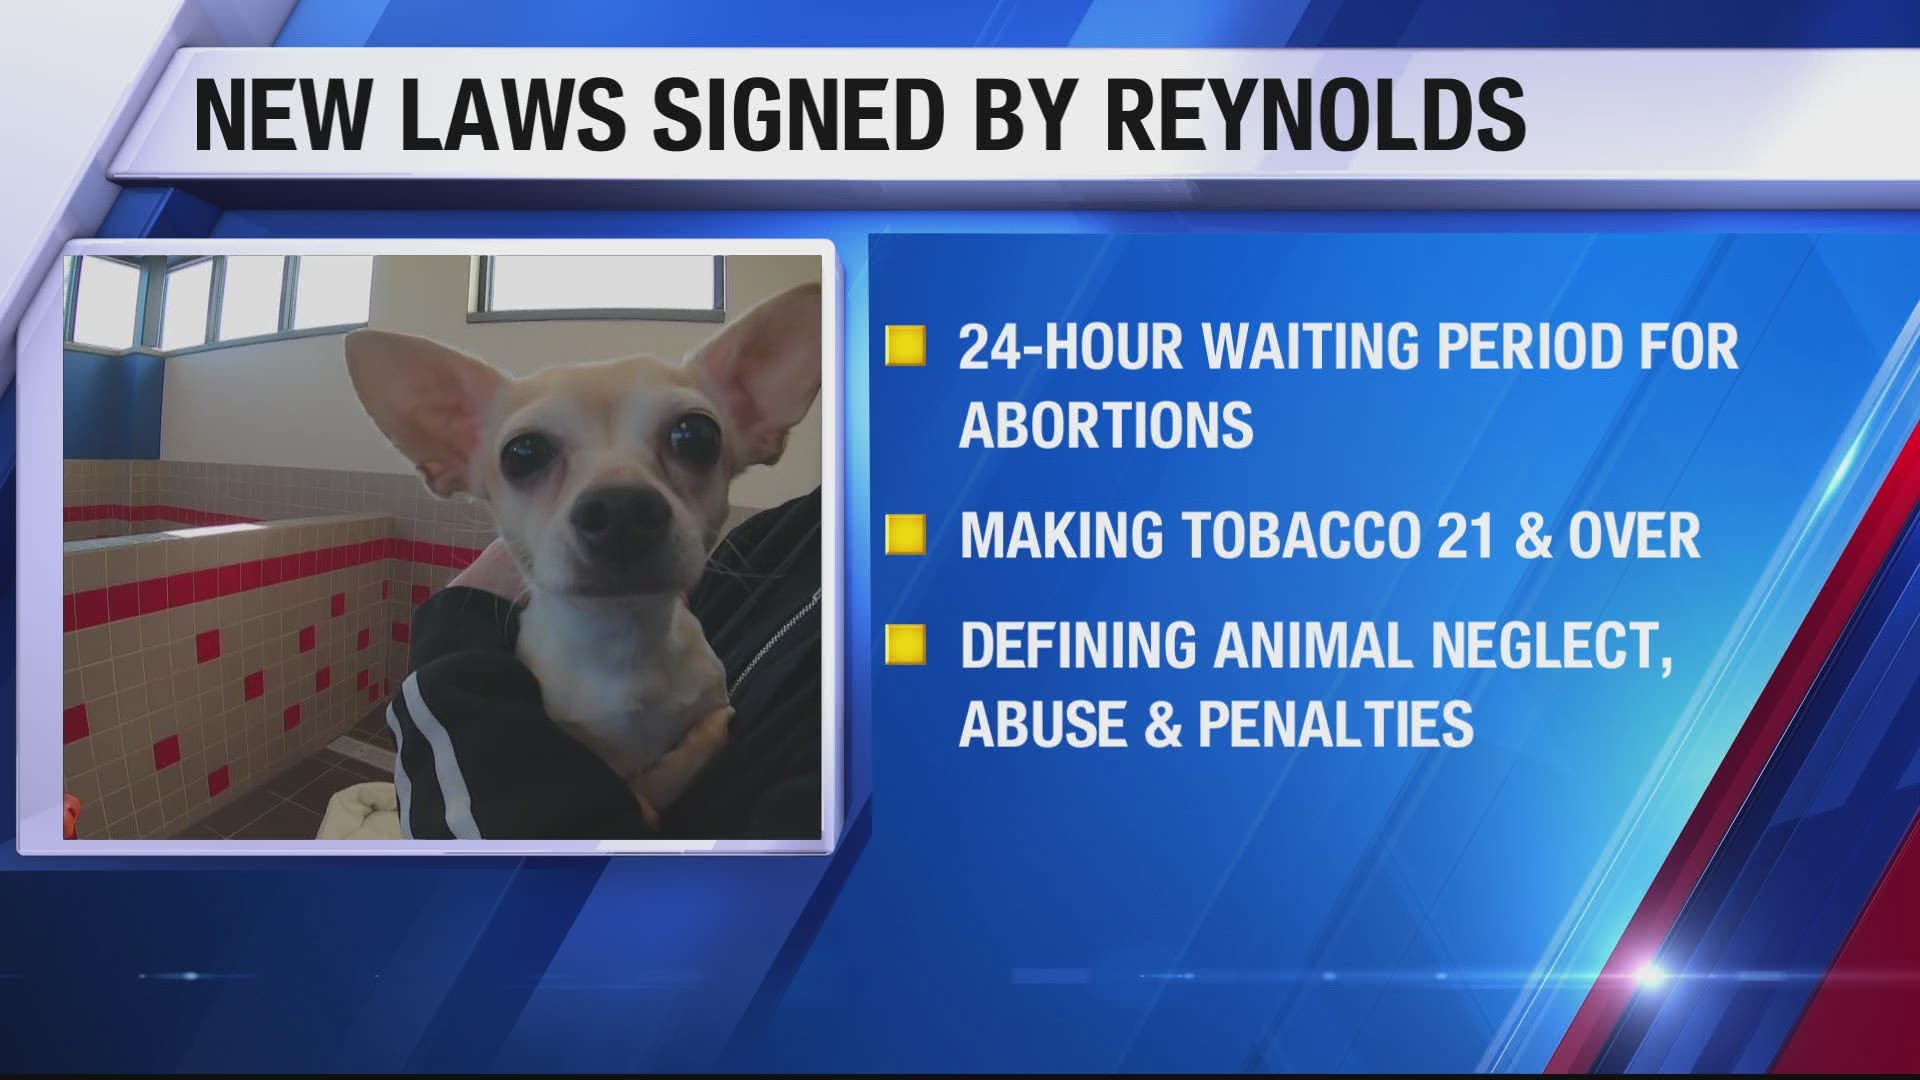 Gov. Kim Reynolds signed 15 bills into law Monday, including a 24-hour waiting period before abortions, upping the legal smoking age and defining animal abuse.